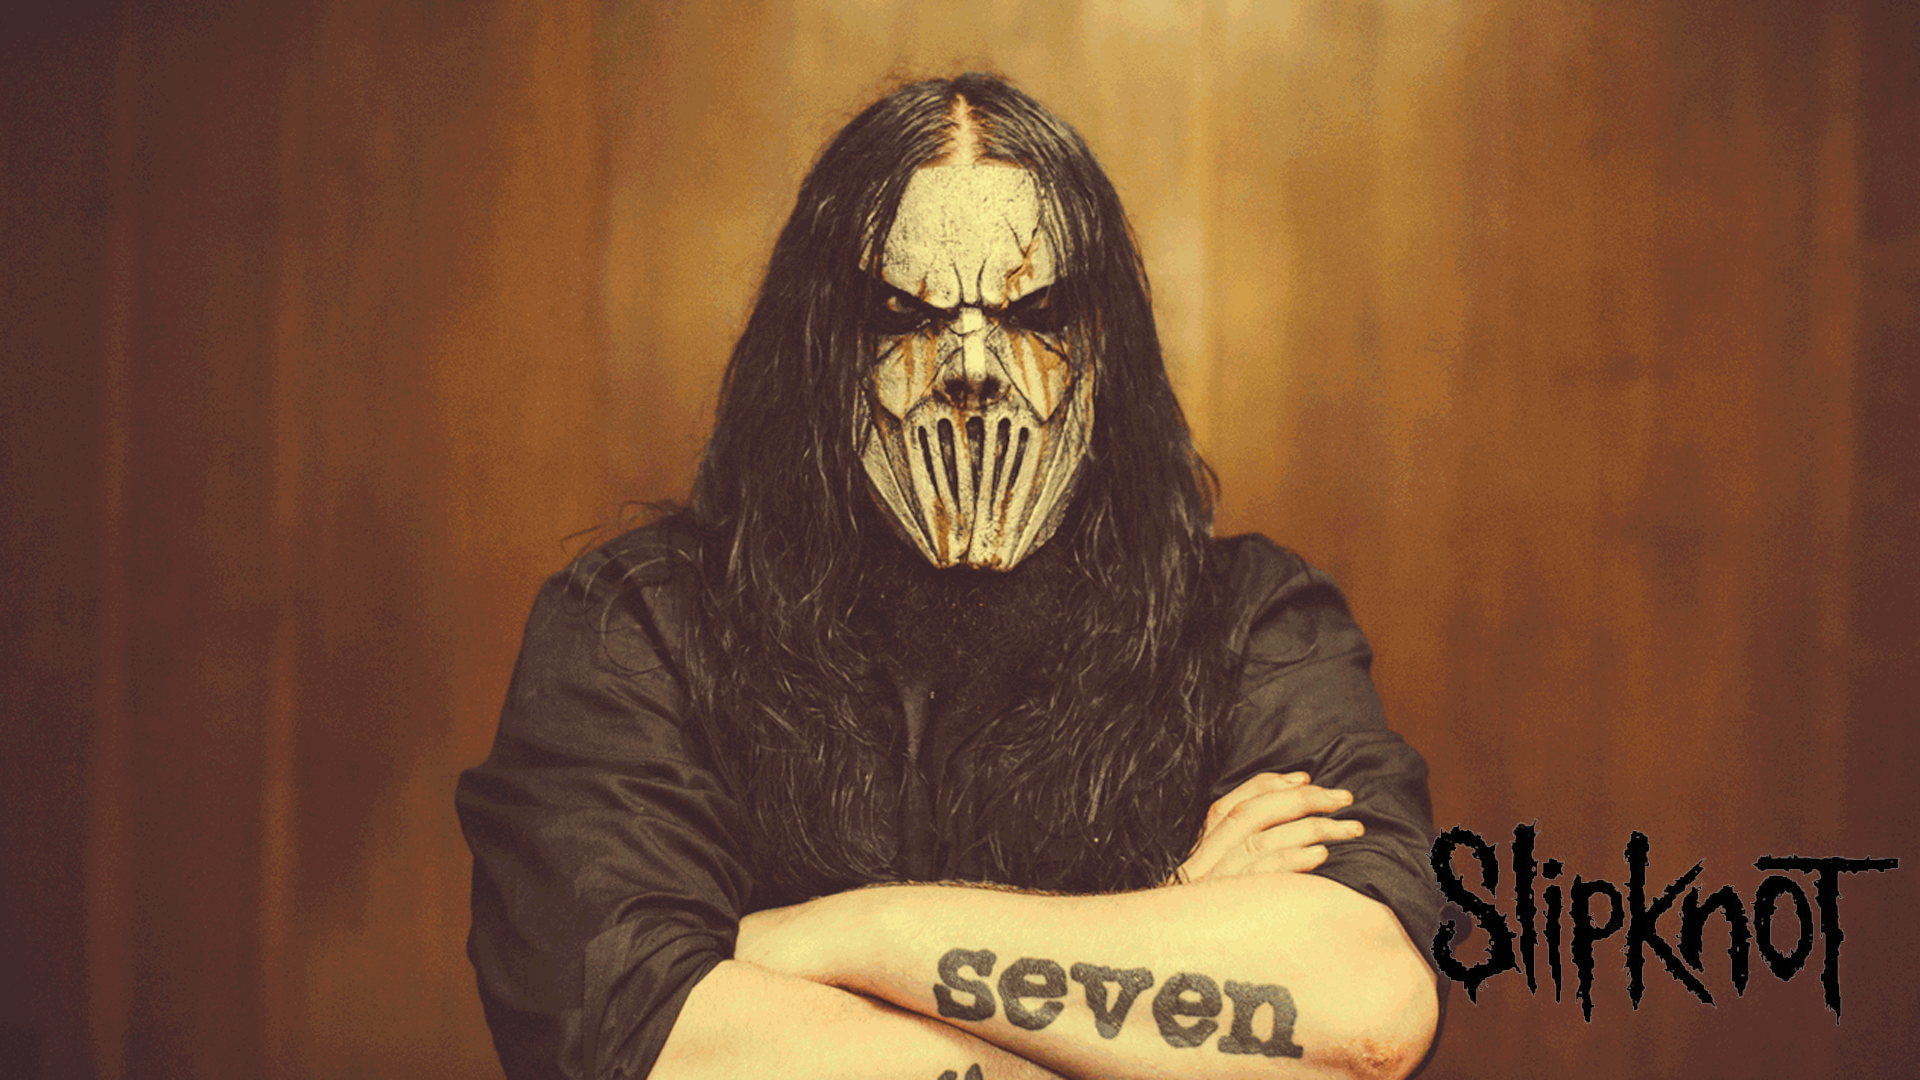 People 1920x1080 Mick Thomson Slipknot arms crossed mask men music band musician